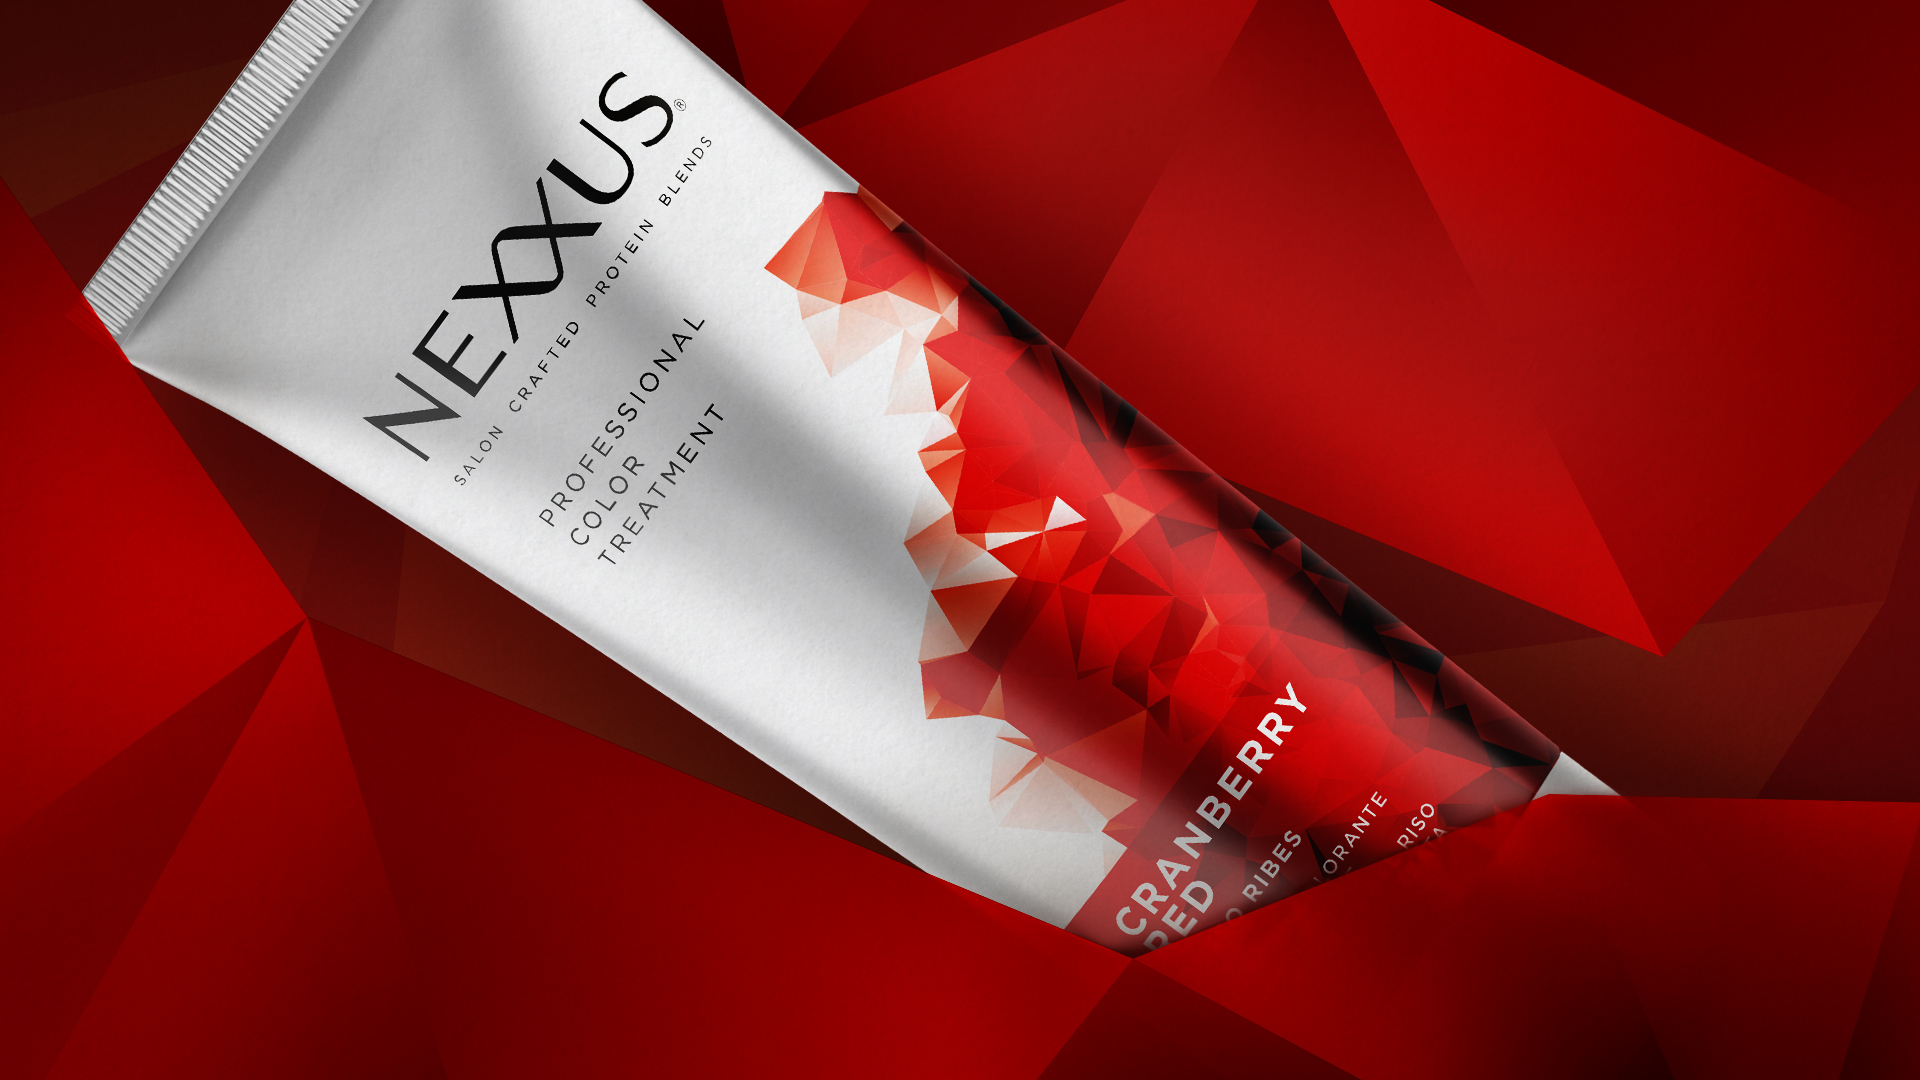 Dynamic Geometry, Modern Elegance and Minimalism. A “Tech” Style Design for the Nexxus Professional Color Treatment Pack